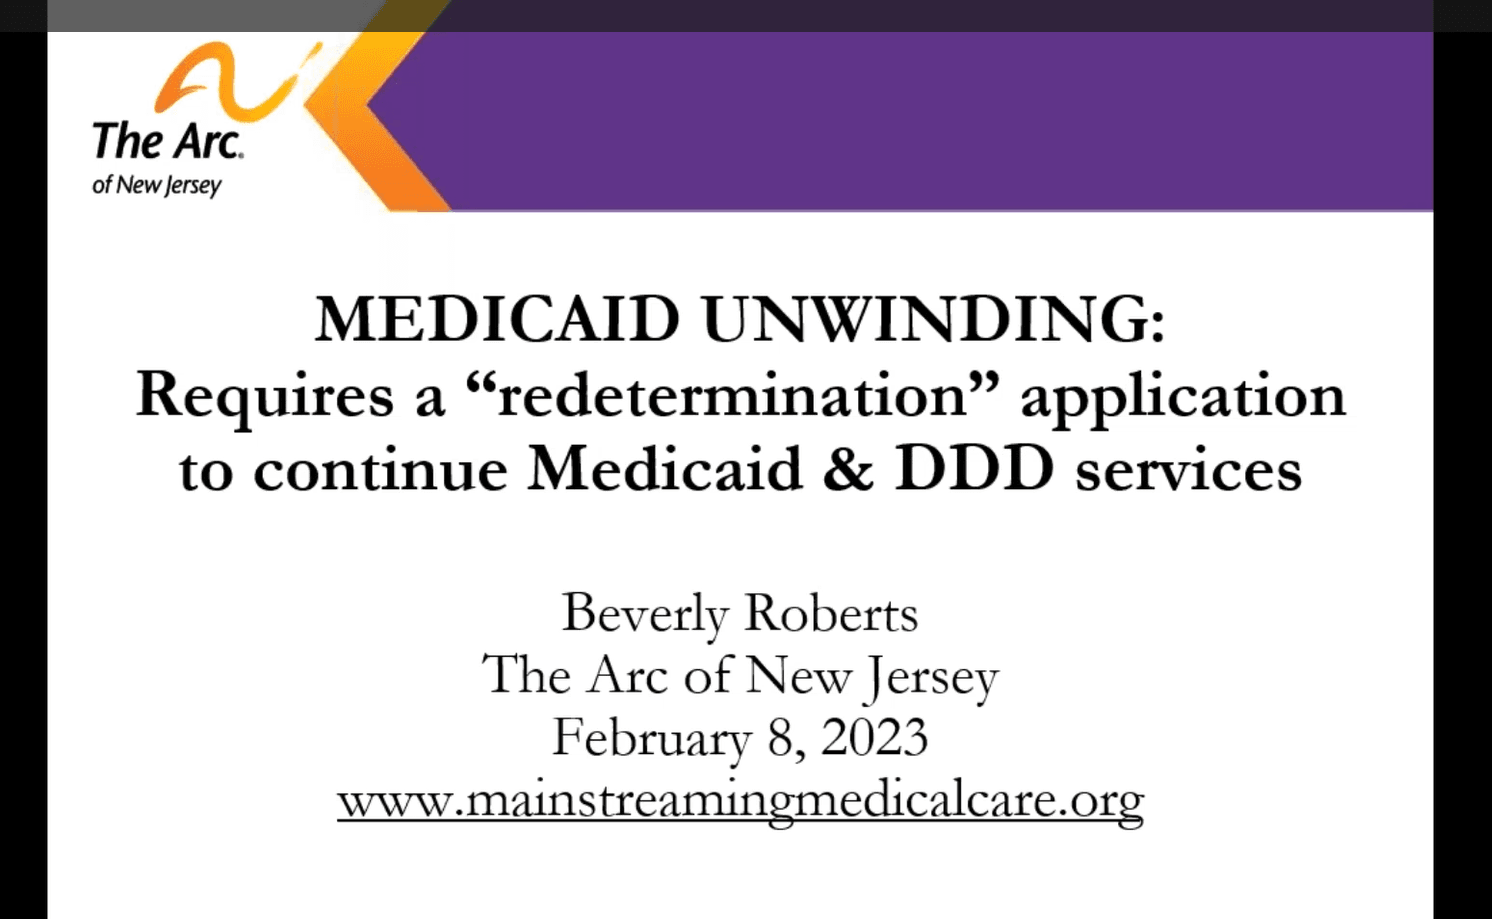 2/8/23 Medicaid Unwinding: Requires a 'redetermination' application to continue Medicaid & DDD services